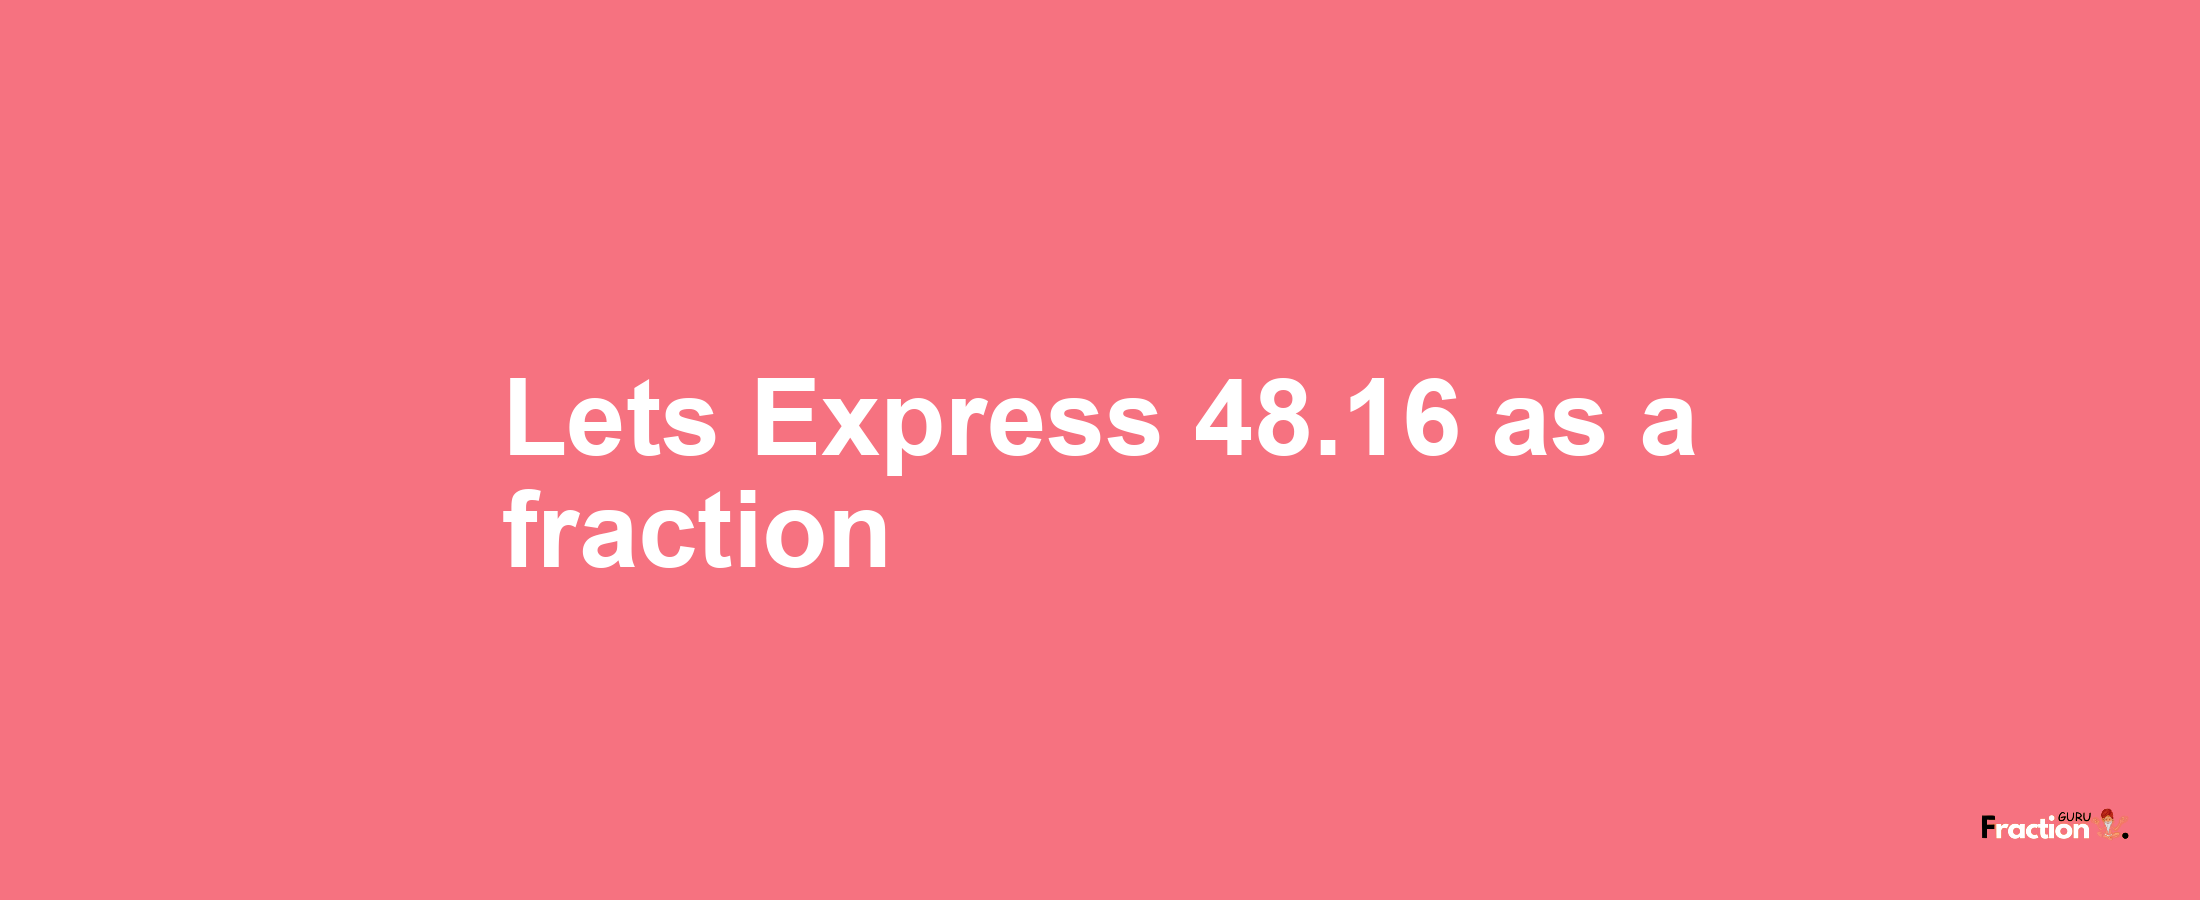 Lets Express 48.16 as afraction